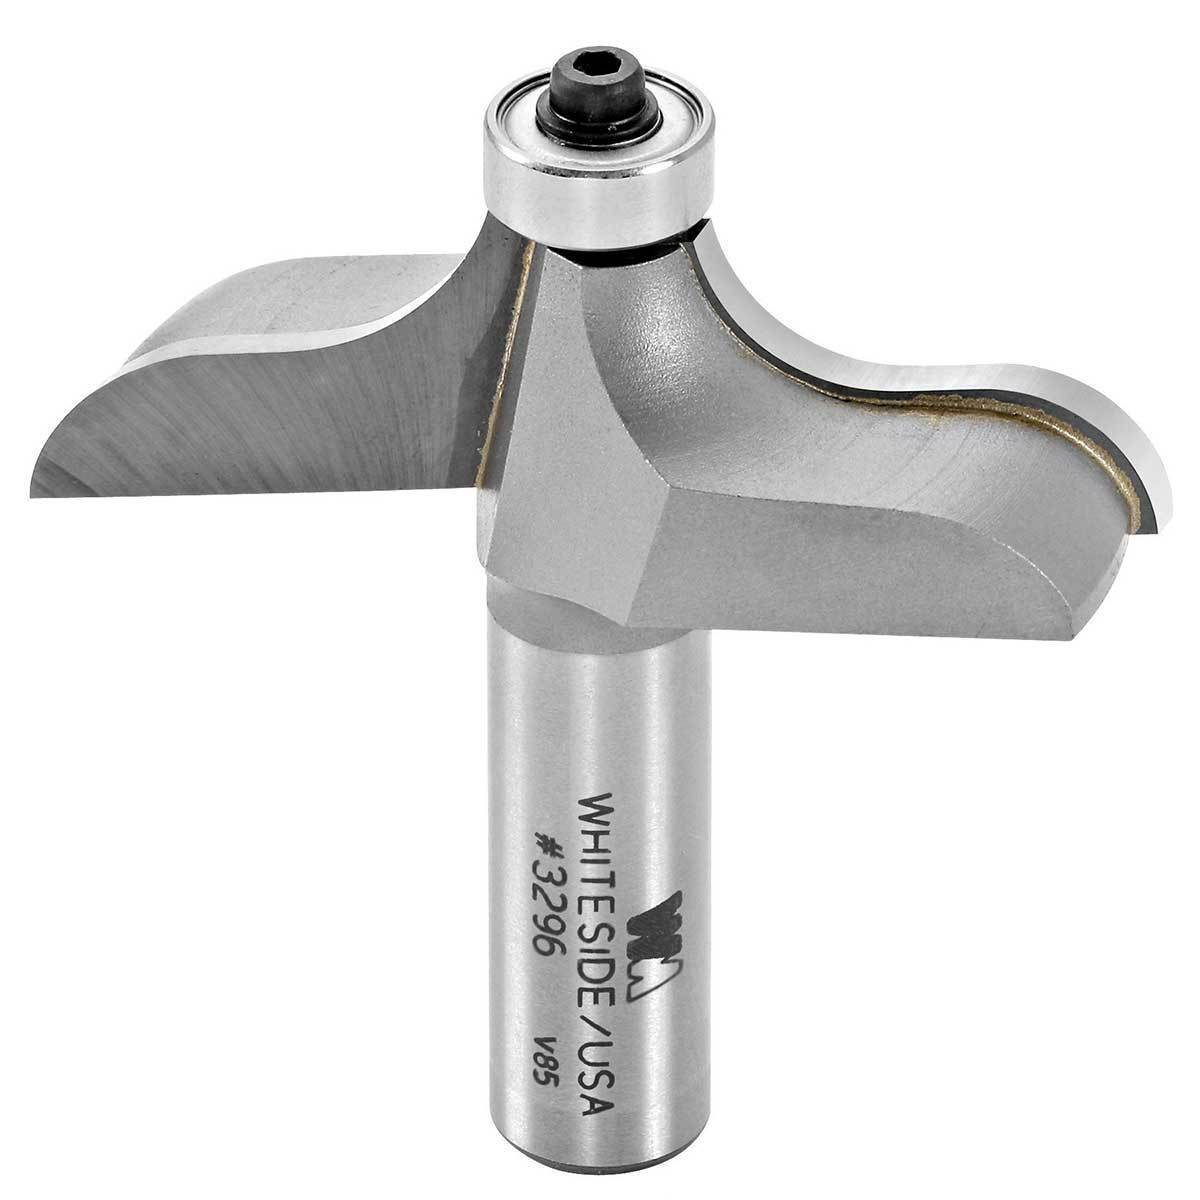 Ultimate Tools Whiteside Table Edge Router Bits - 1/2" Shank